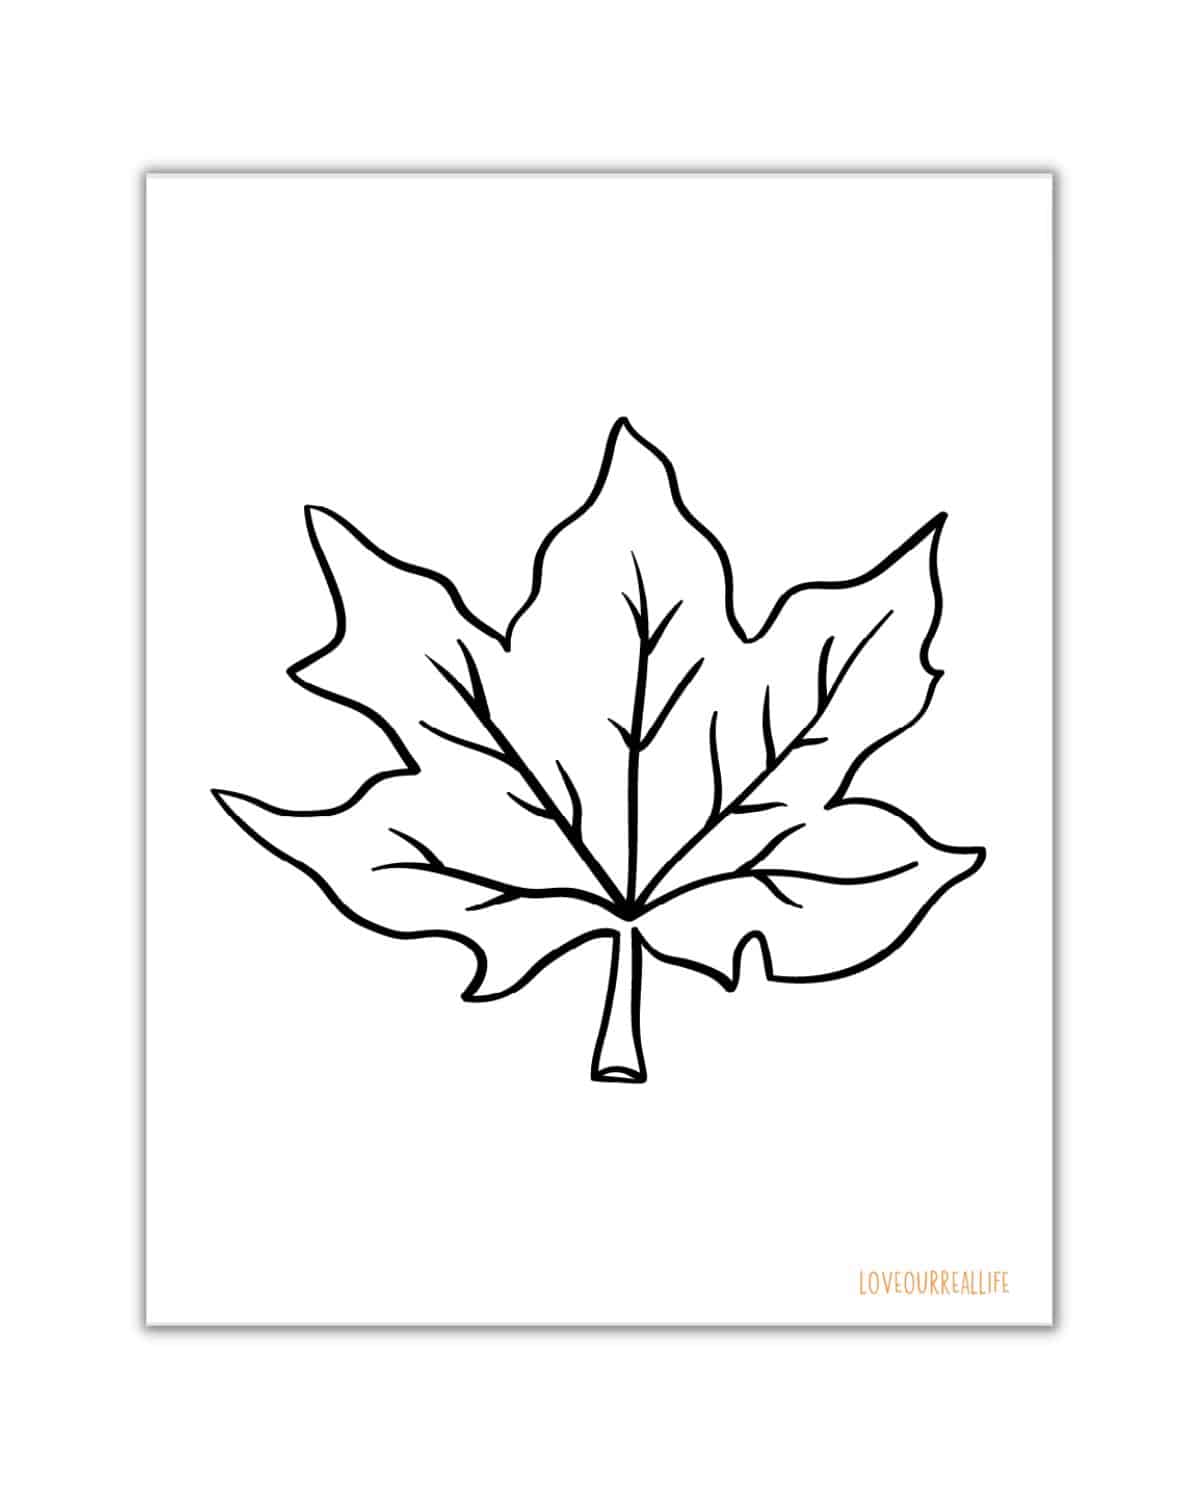 Fall leaves coloring pages free printable leaf templates â love our real life